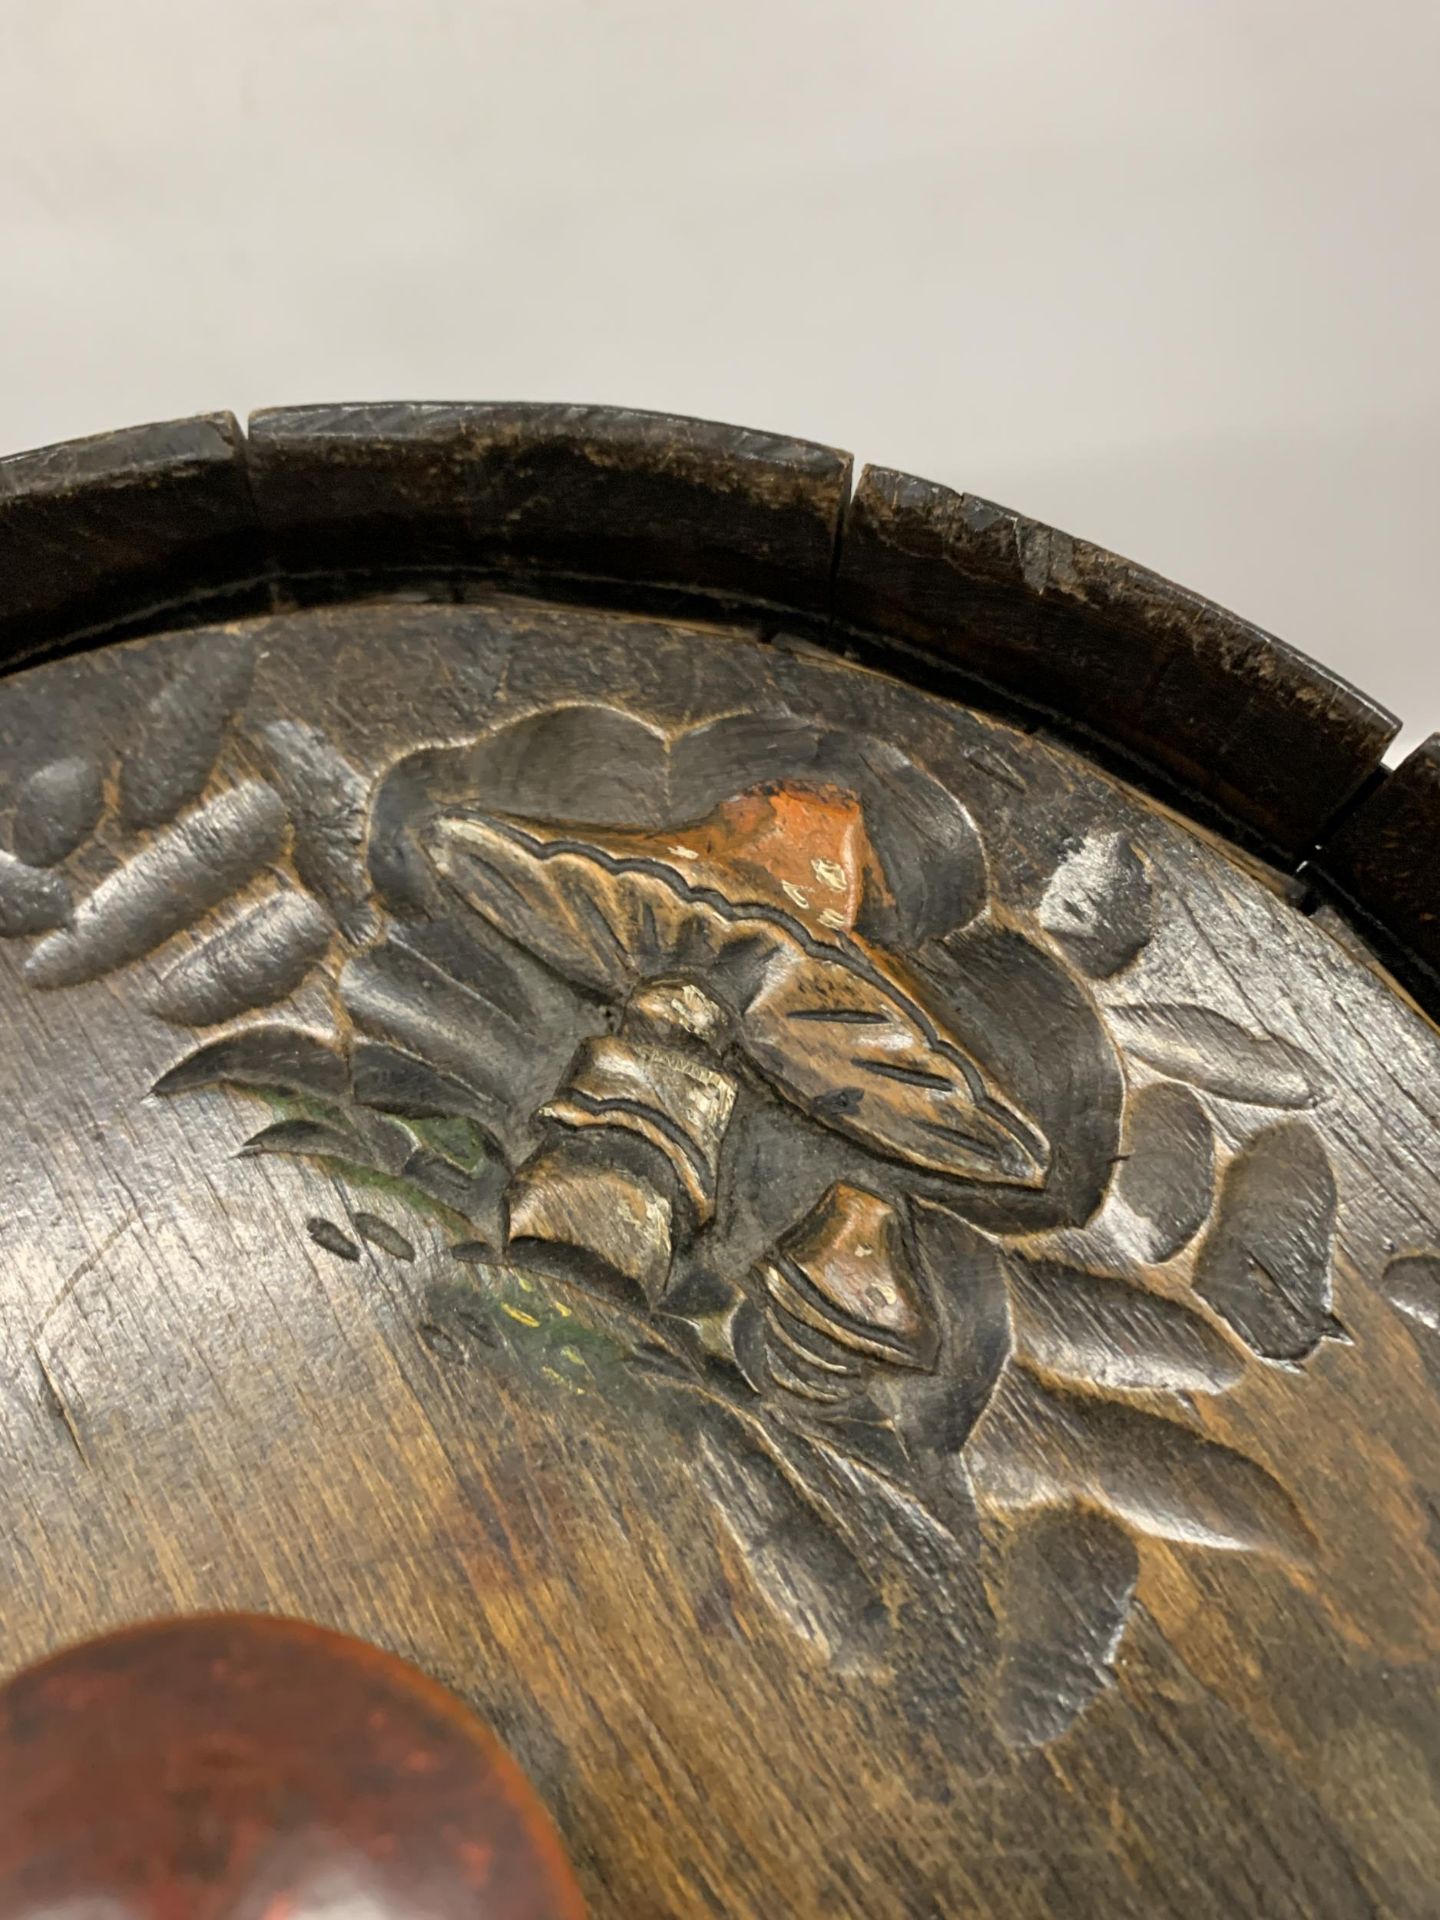 A VINTAGE WOODEN BARREL WITH LEPRACHAUN DESIGN, WELL MADE, SAID TO BE MADE WHEN IN A CELLAR IN WWII - Image 4 of 5